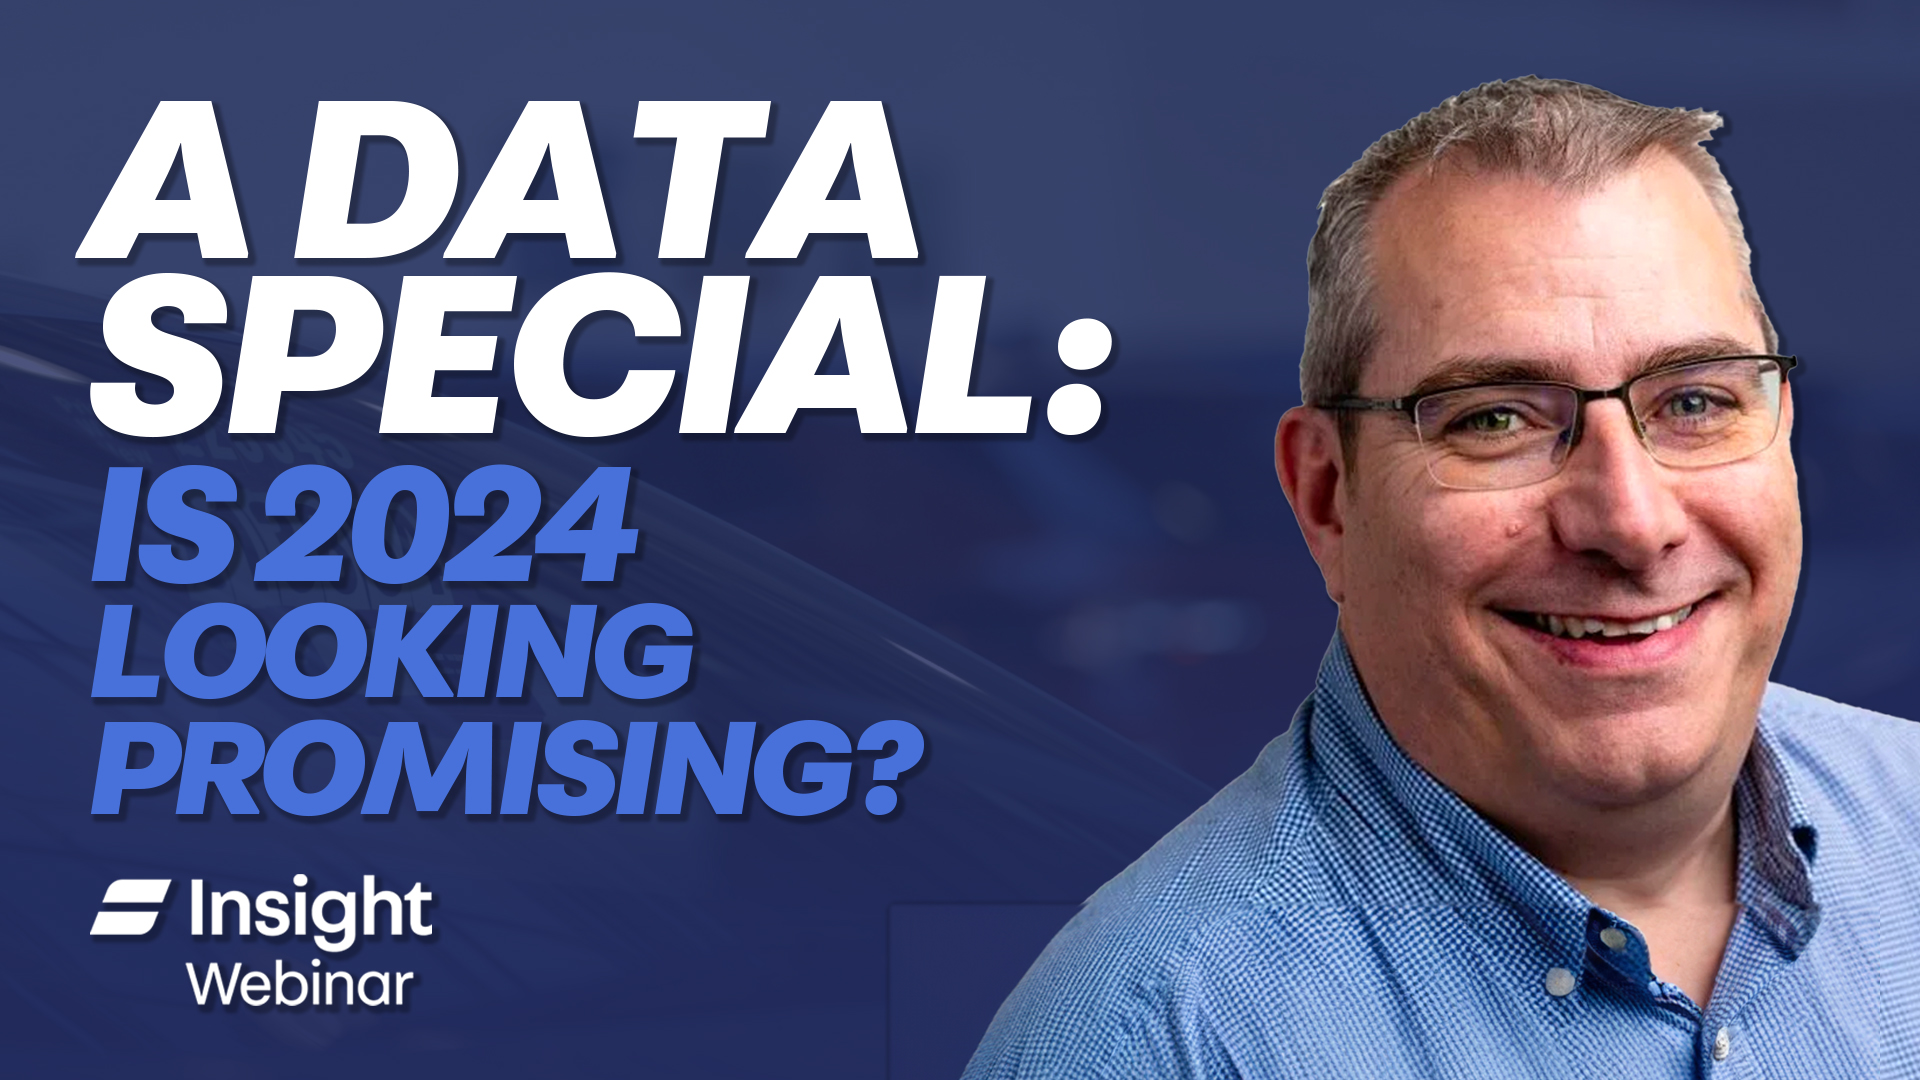 A data special: Is 2024 looking promising?